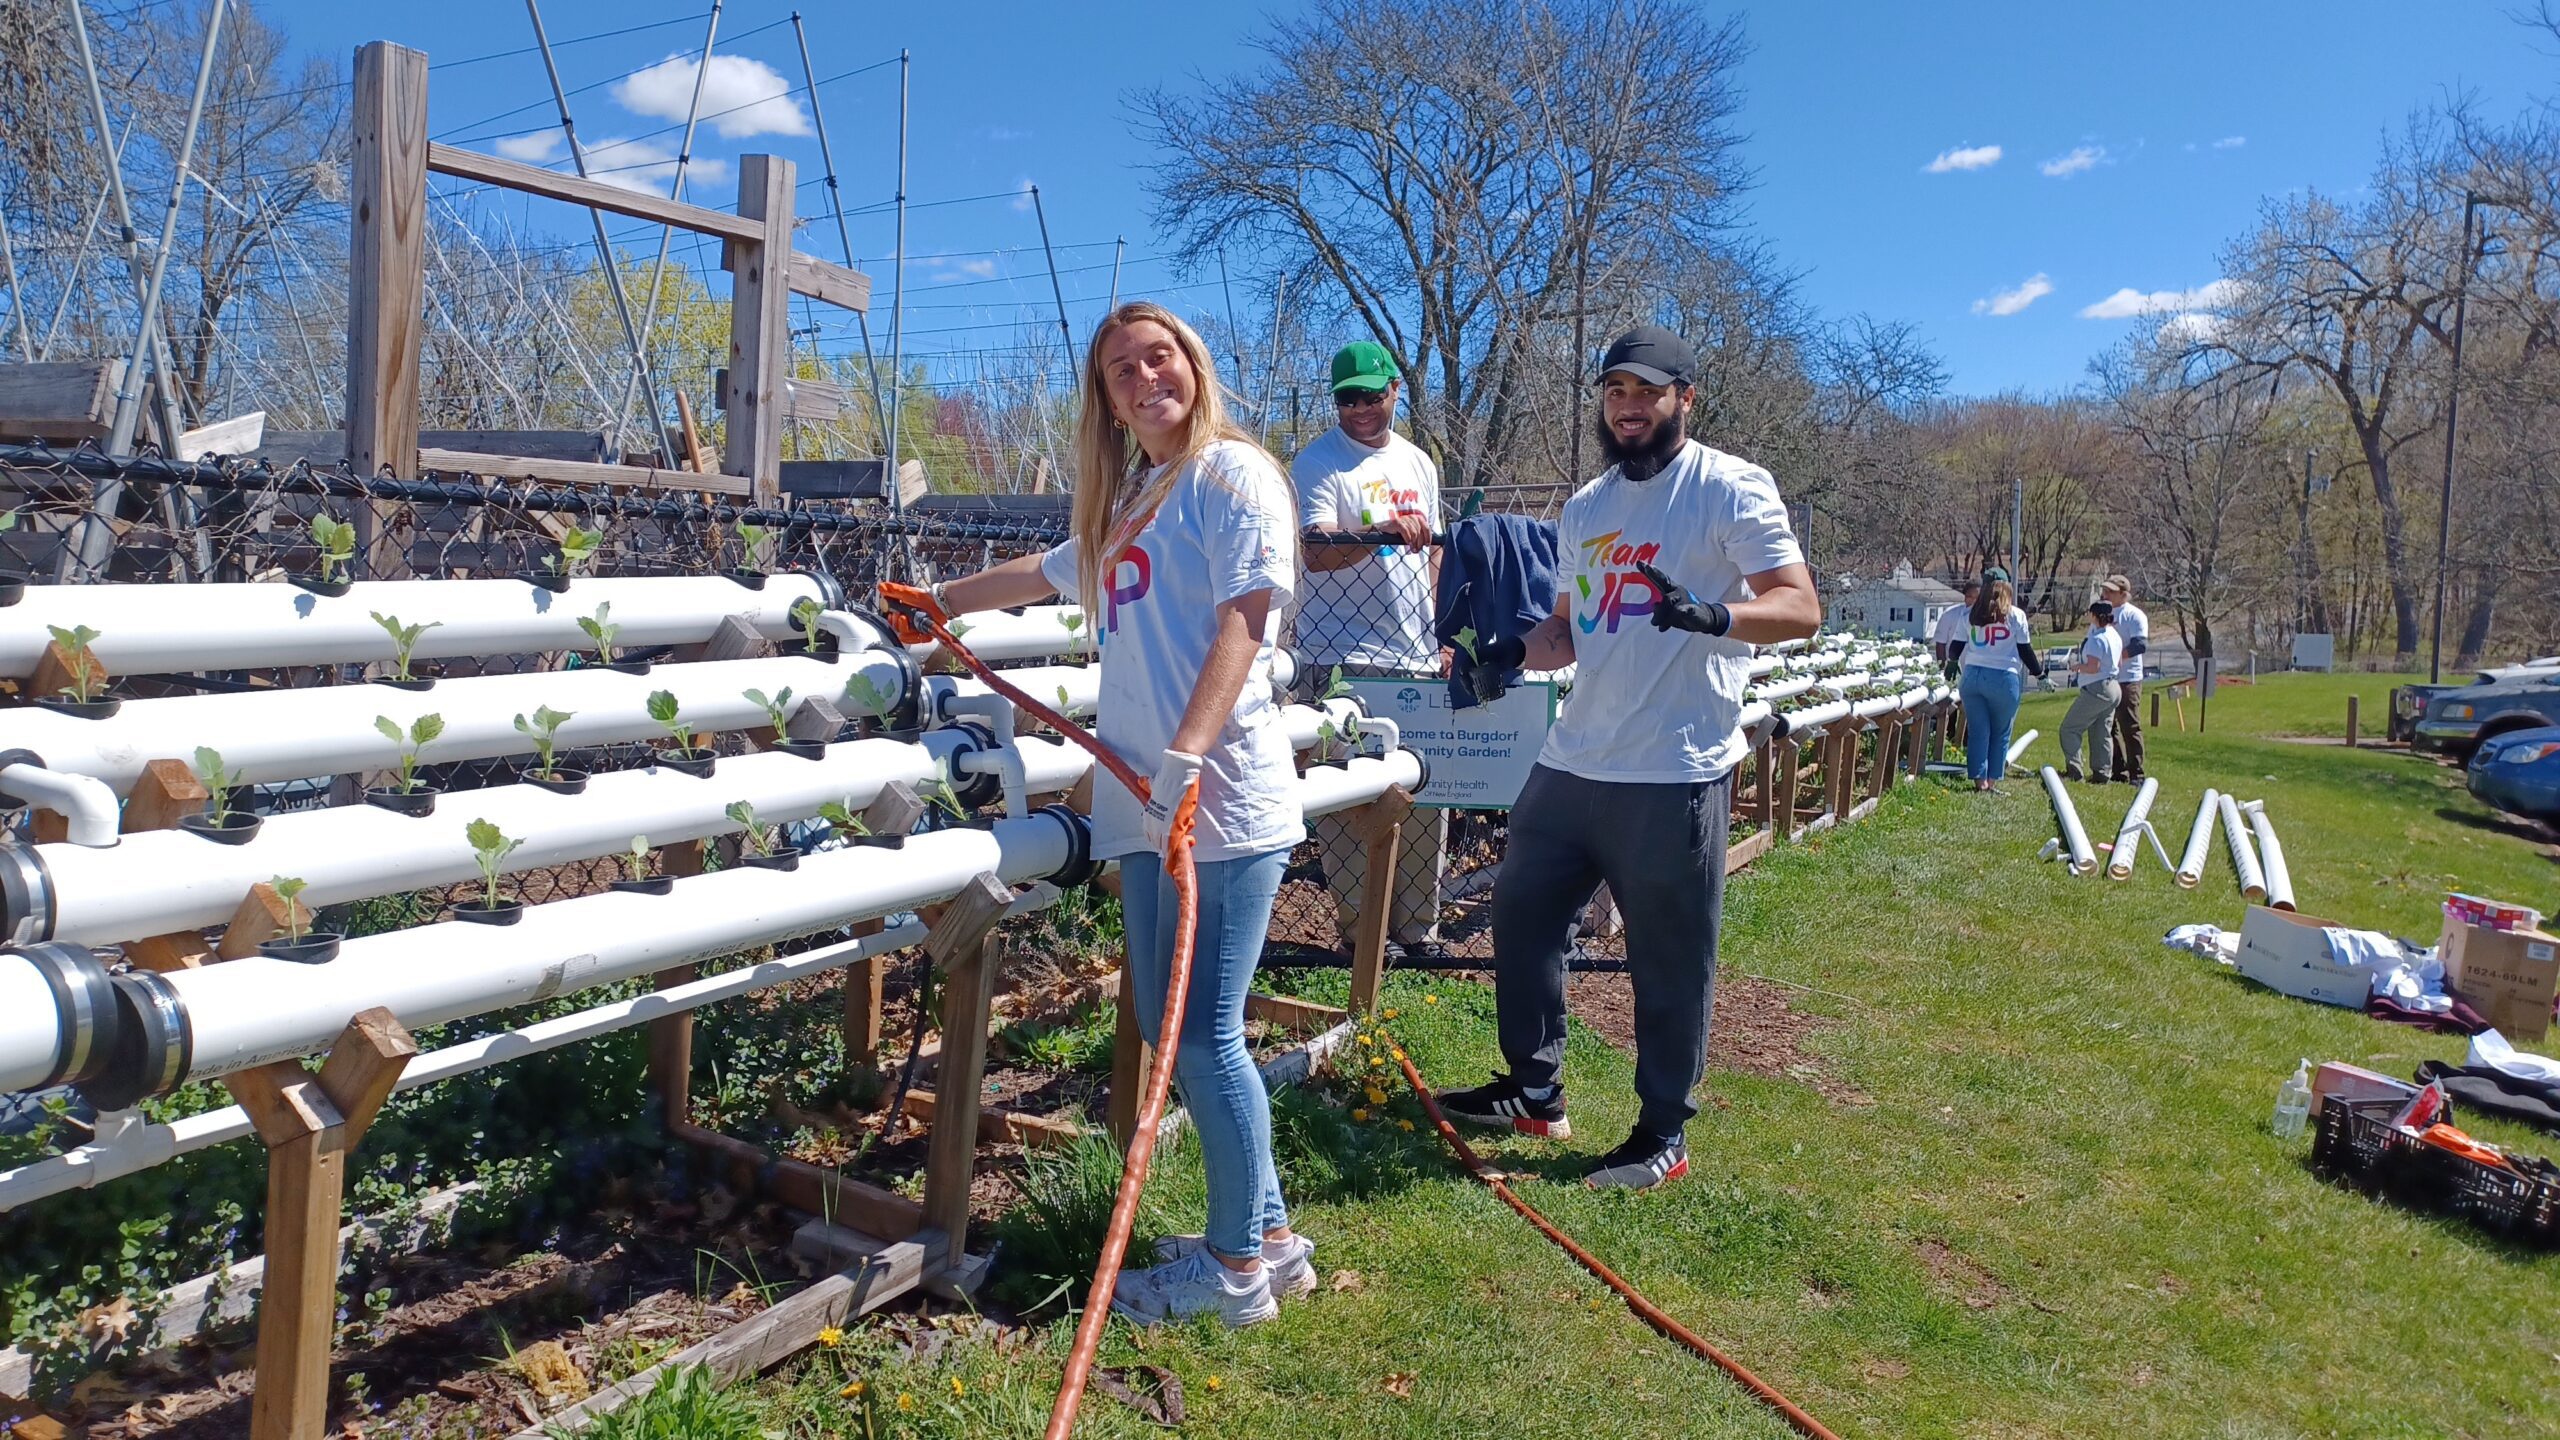 Comcast Employees ‘Team UP’ across New England During National Volunteer Month